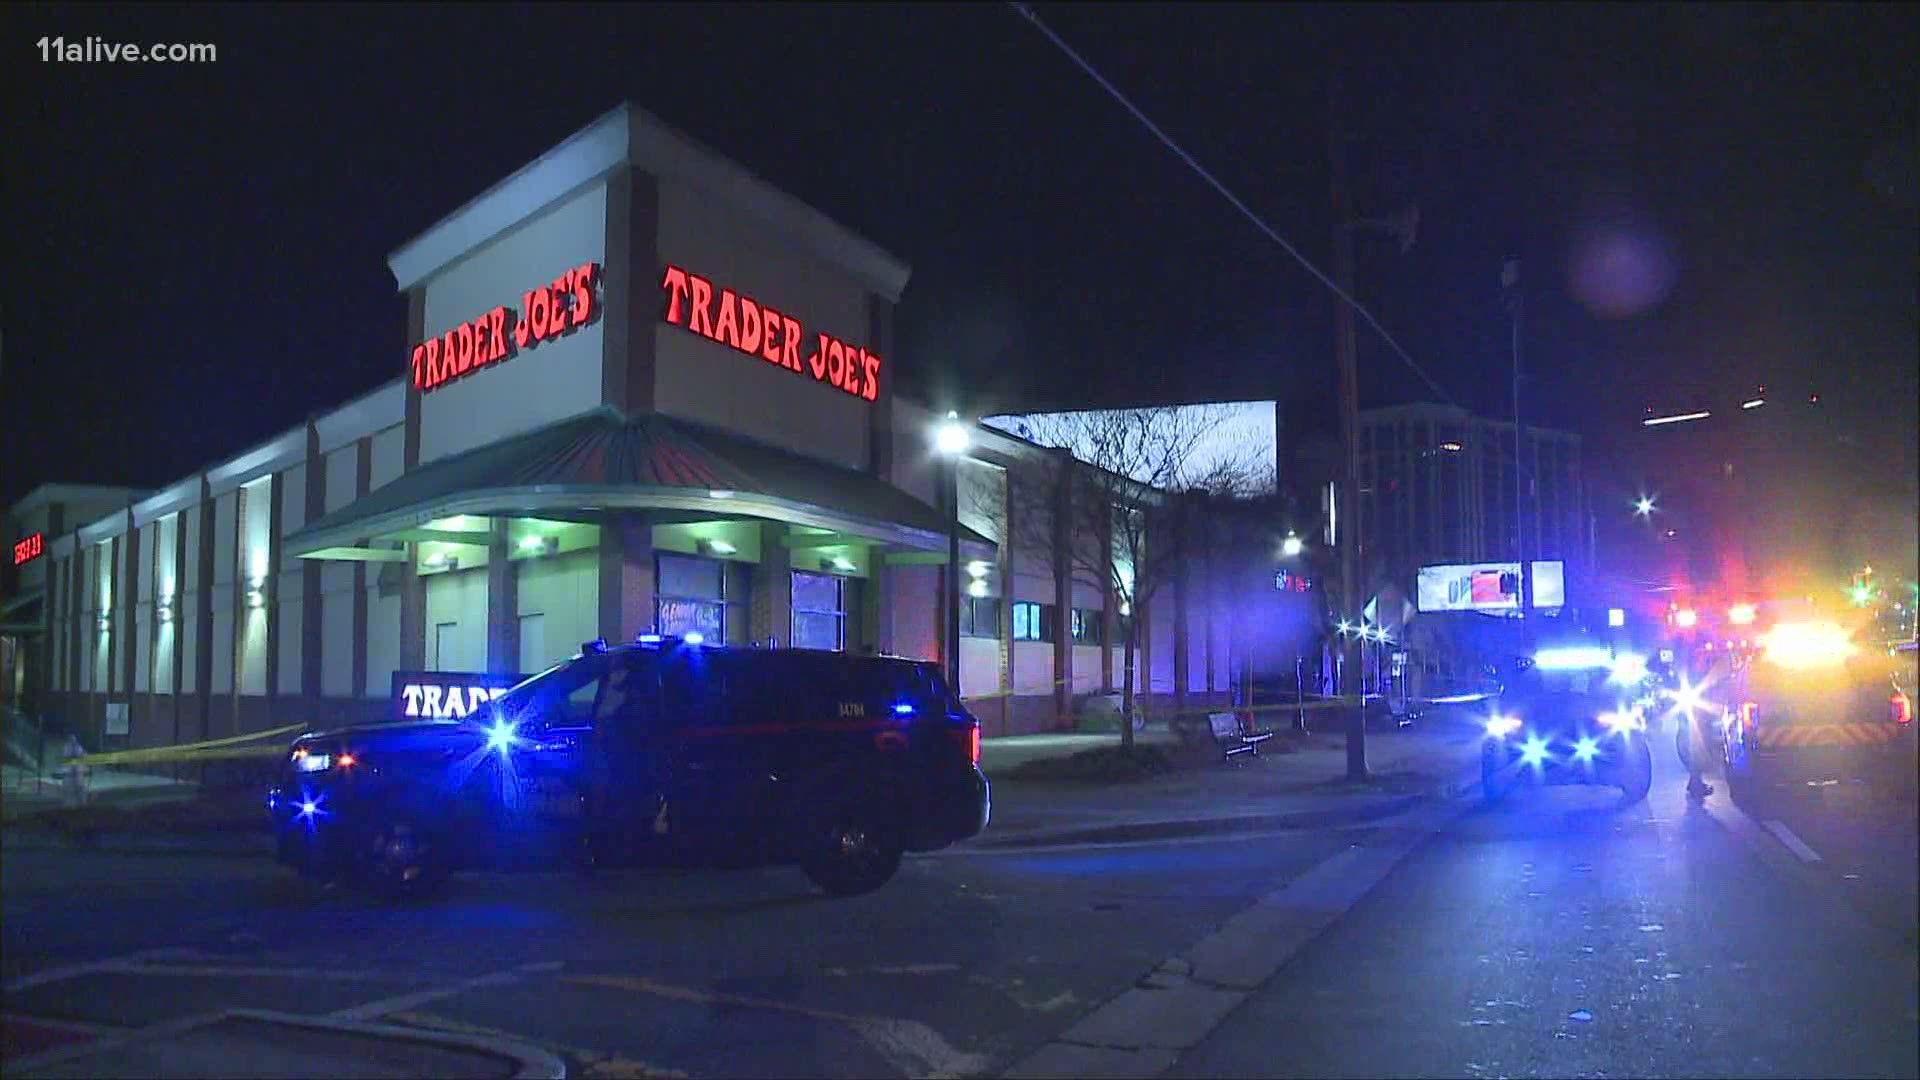 Police suggest the victims were shot in the area of Trader Joe's and the Red Martini which is next door.